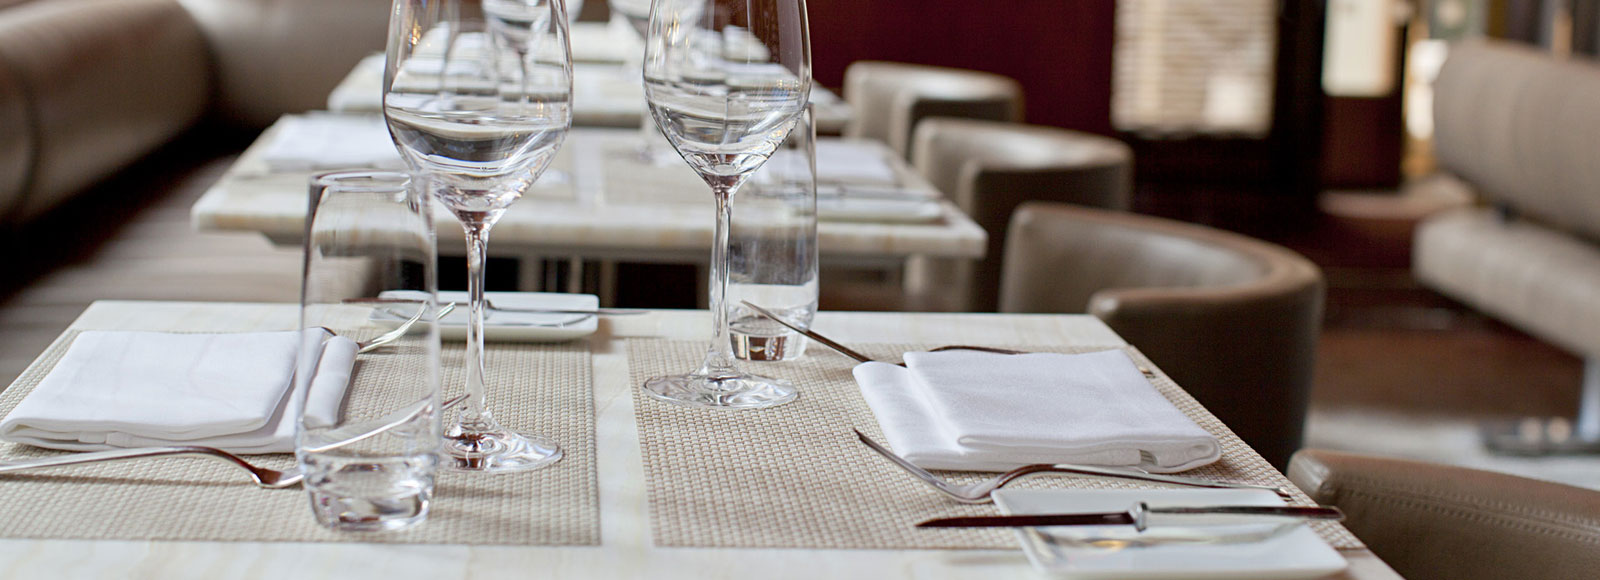 9 Reasons Why Top Restaurants Love Chilewich Placemats